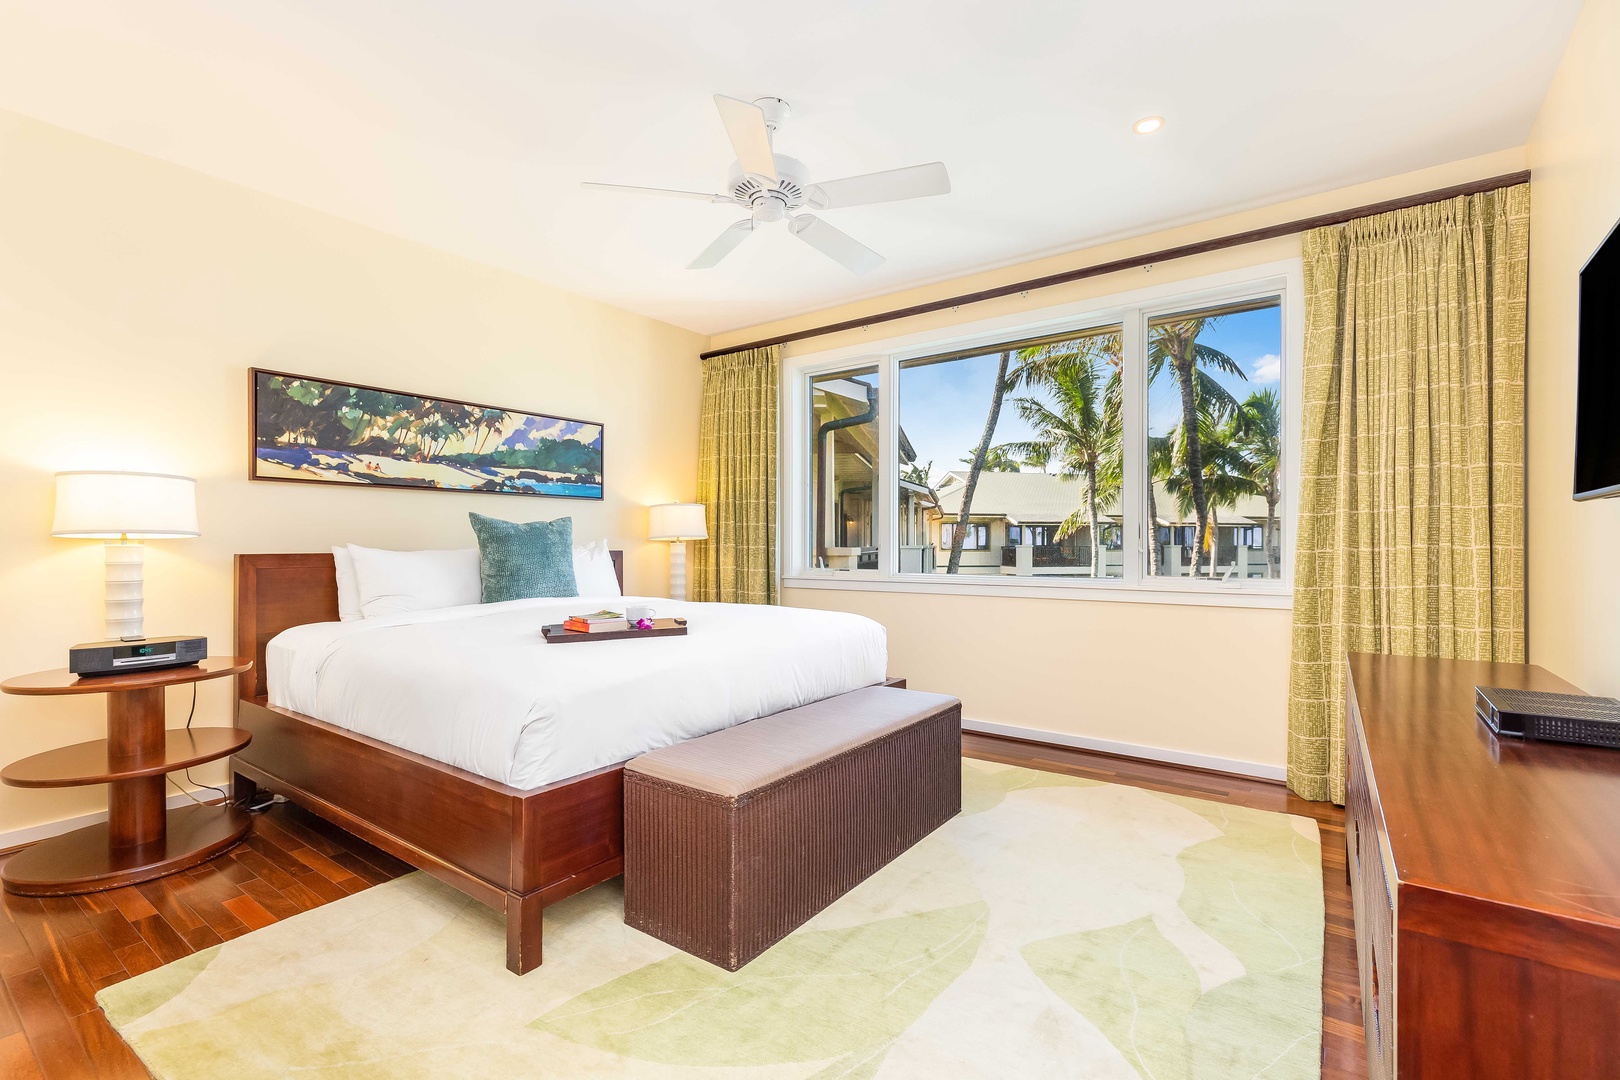 Kahuku Vacation Rentals, Turtle Bay Villas 313 - Master bedroom with Ocean view has a king bed